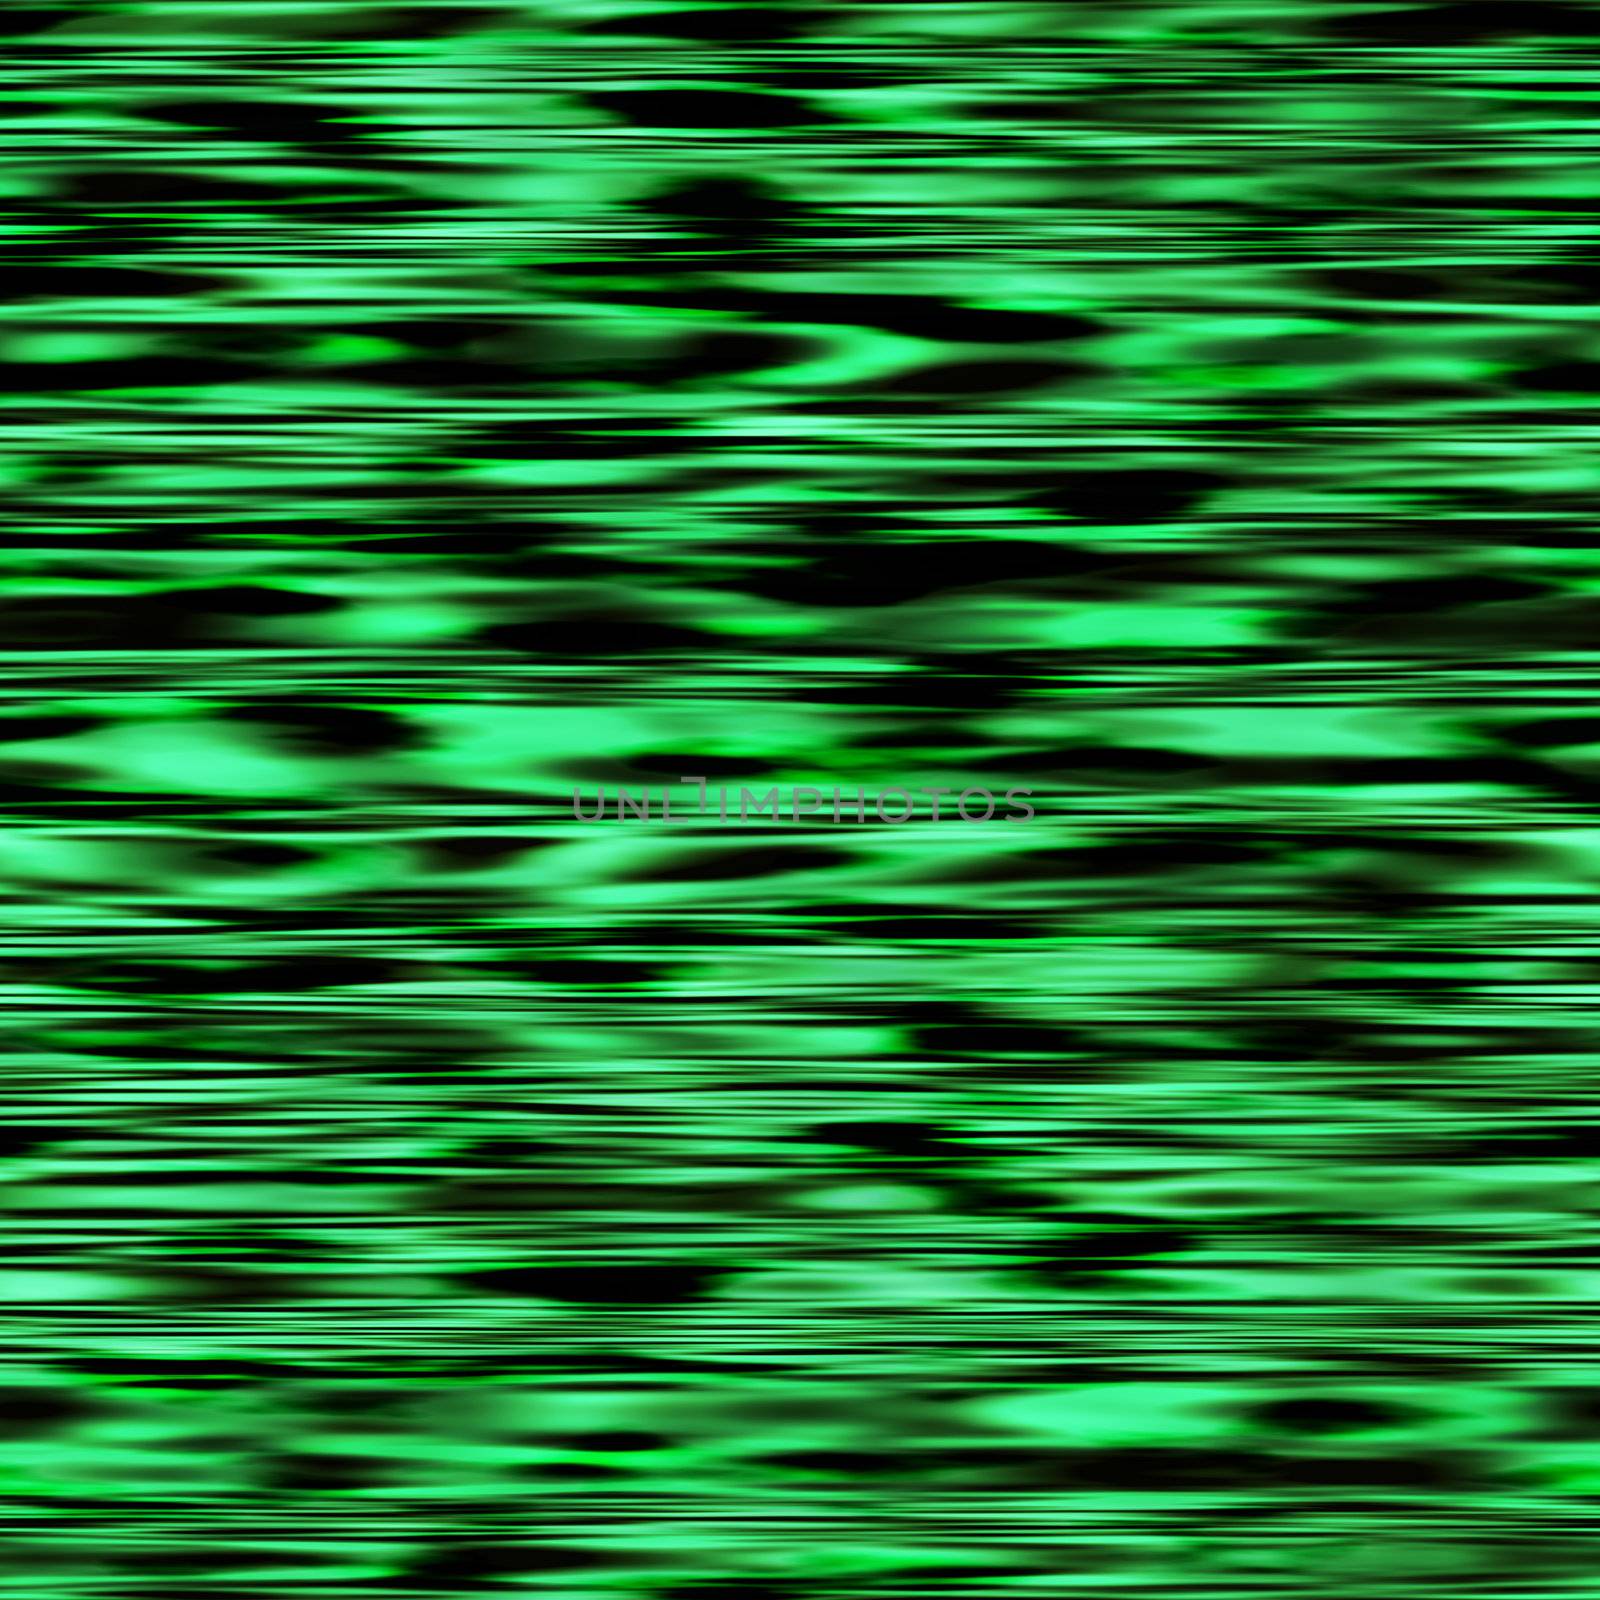 elegant dark green ripples background, would make a good health and/ or environment related background, tiles also seamlessly as a patttern